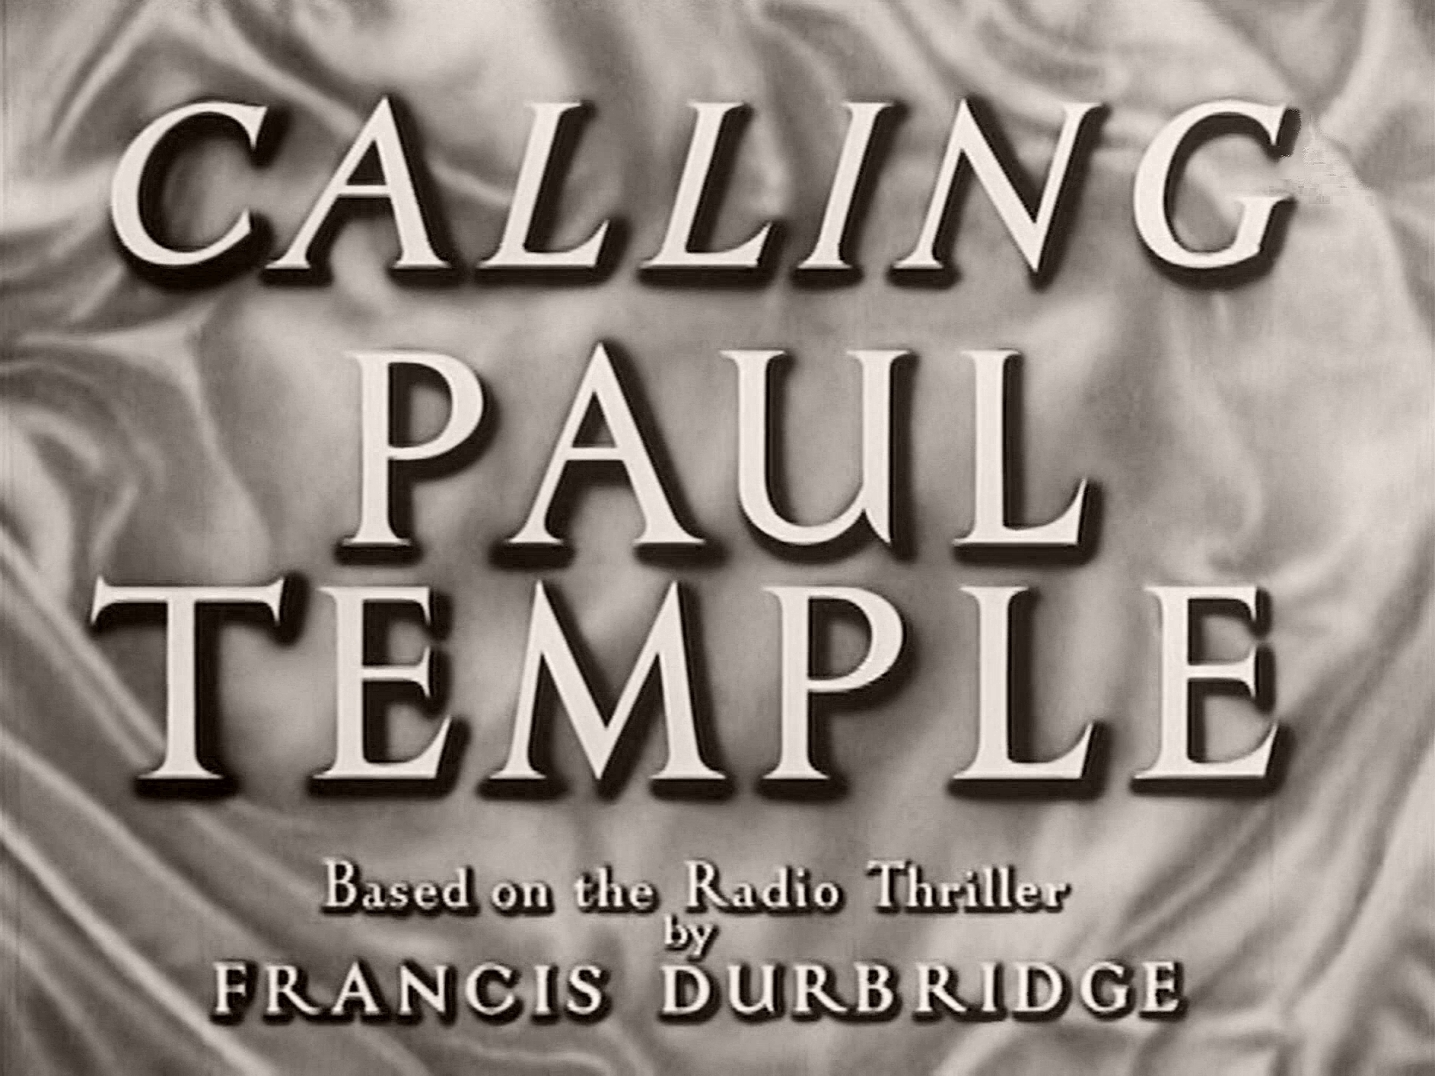 Main title from Calling Paul Temple (1948) (3).  Based on the radio thriller by Francis Durbridge